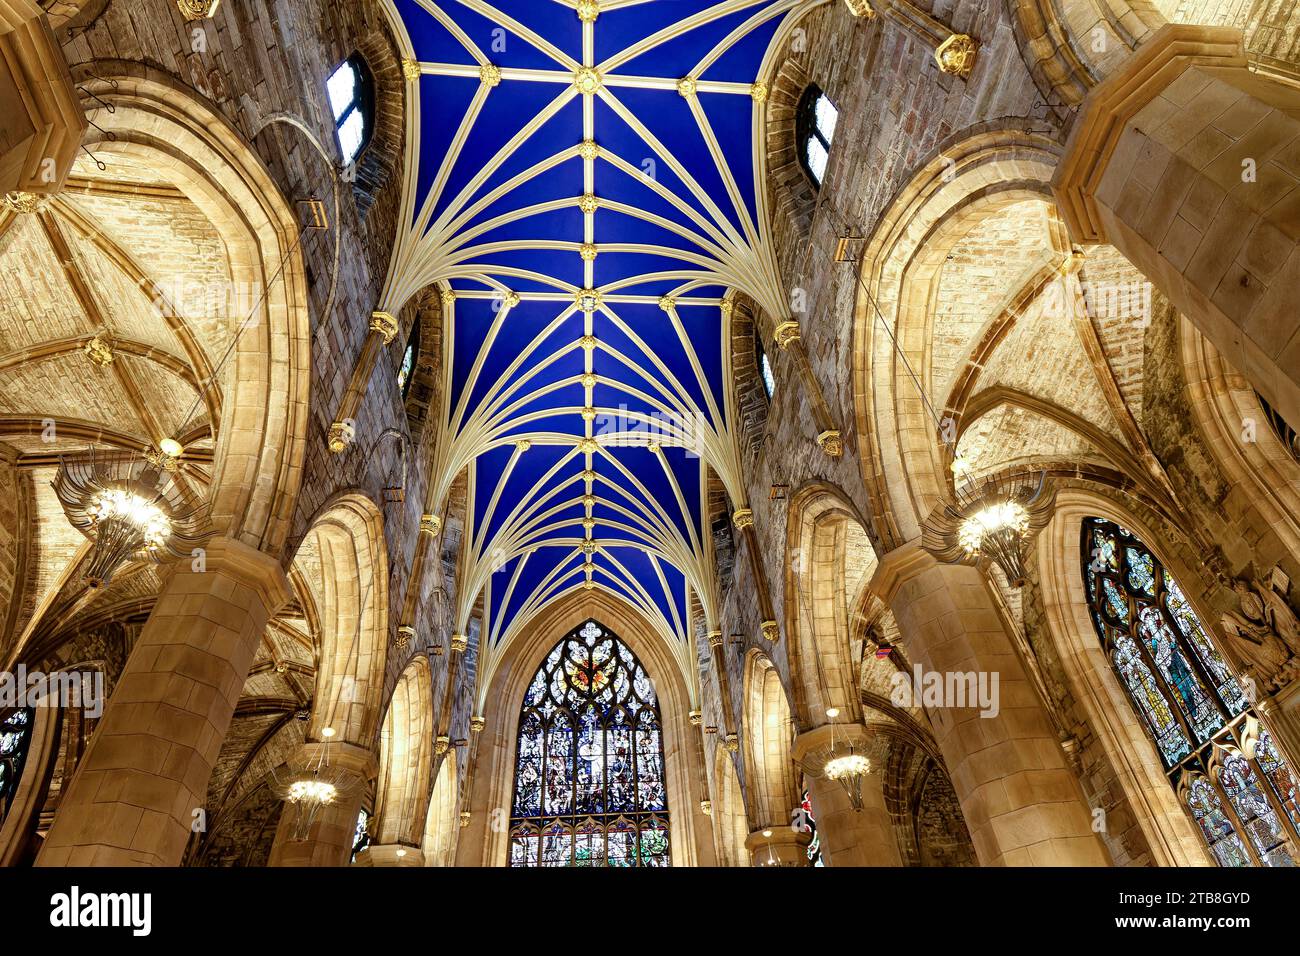 St Giles' Cathedral Old Town Edinburgh interior the blue ceiling and stained glass windows Stock Photo